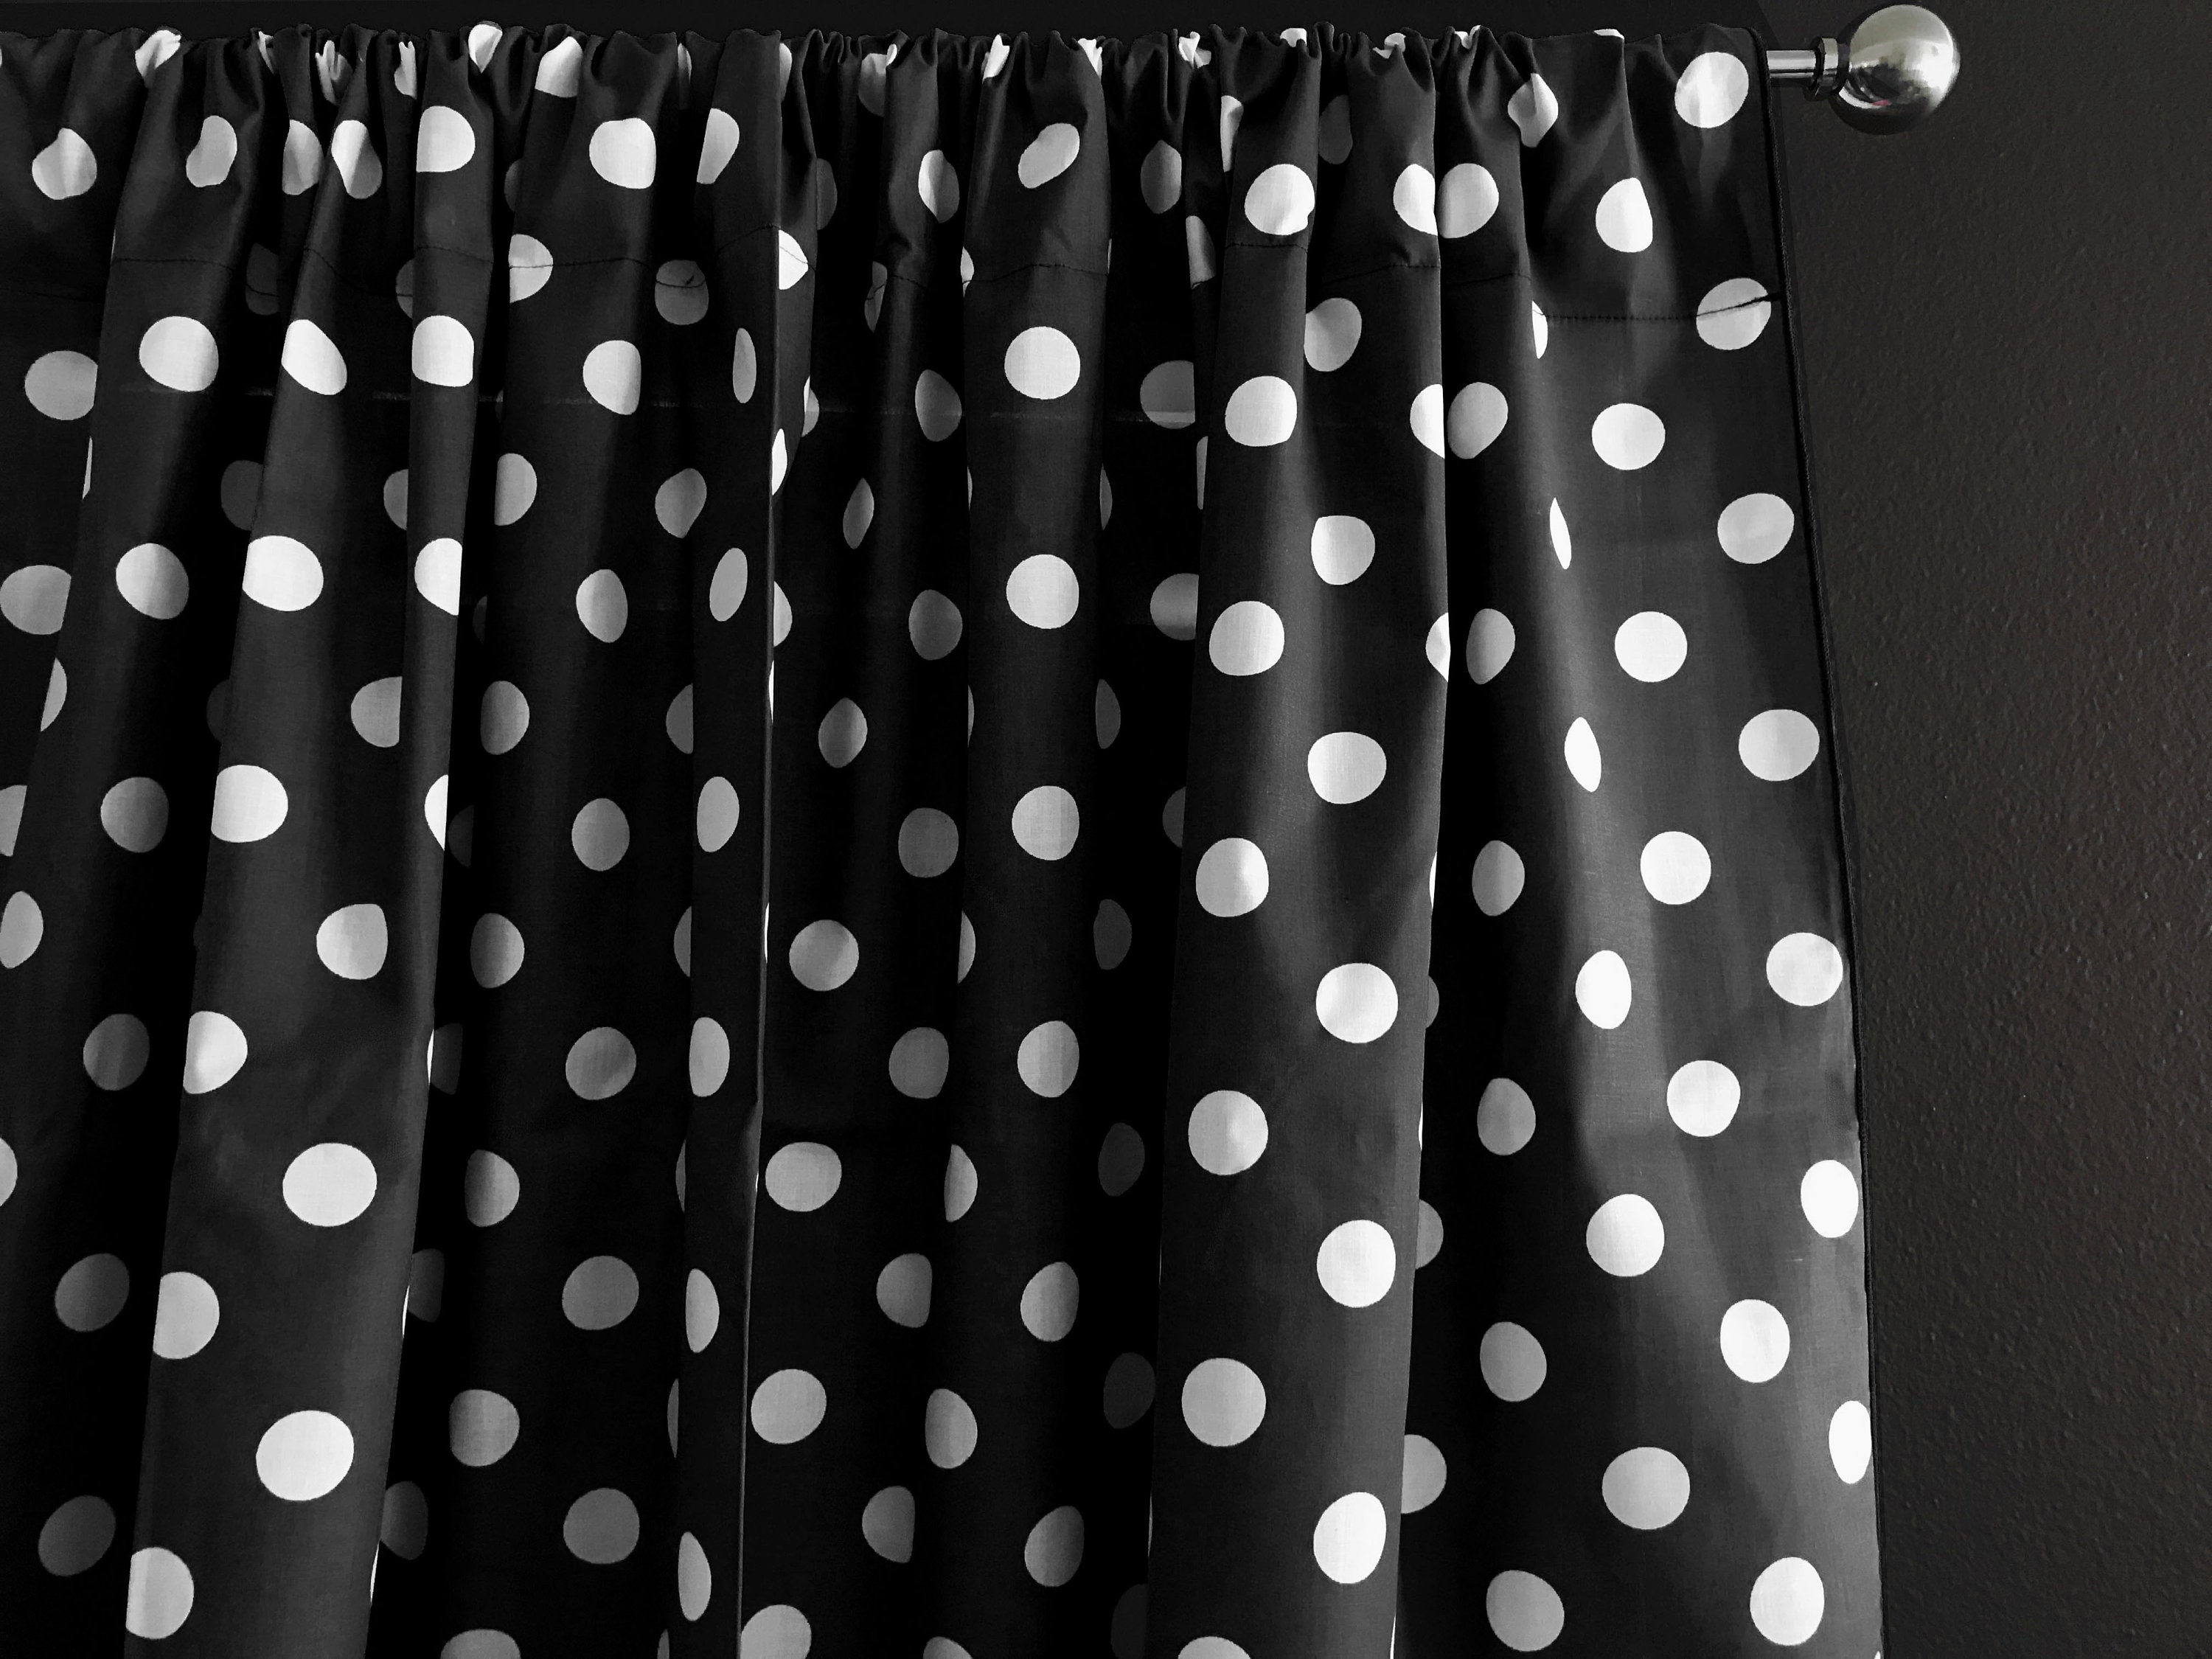 Polka Dots Cotton Curtain Panel 58 Inch Wide / Window Décor / | Etsy